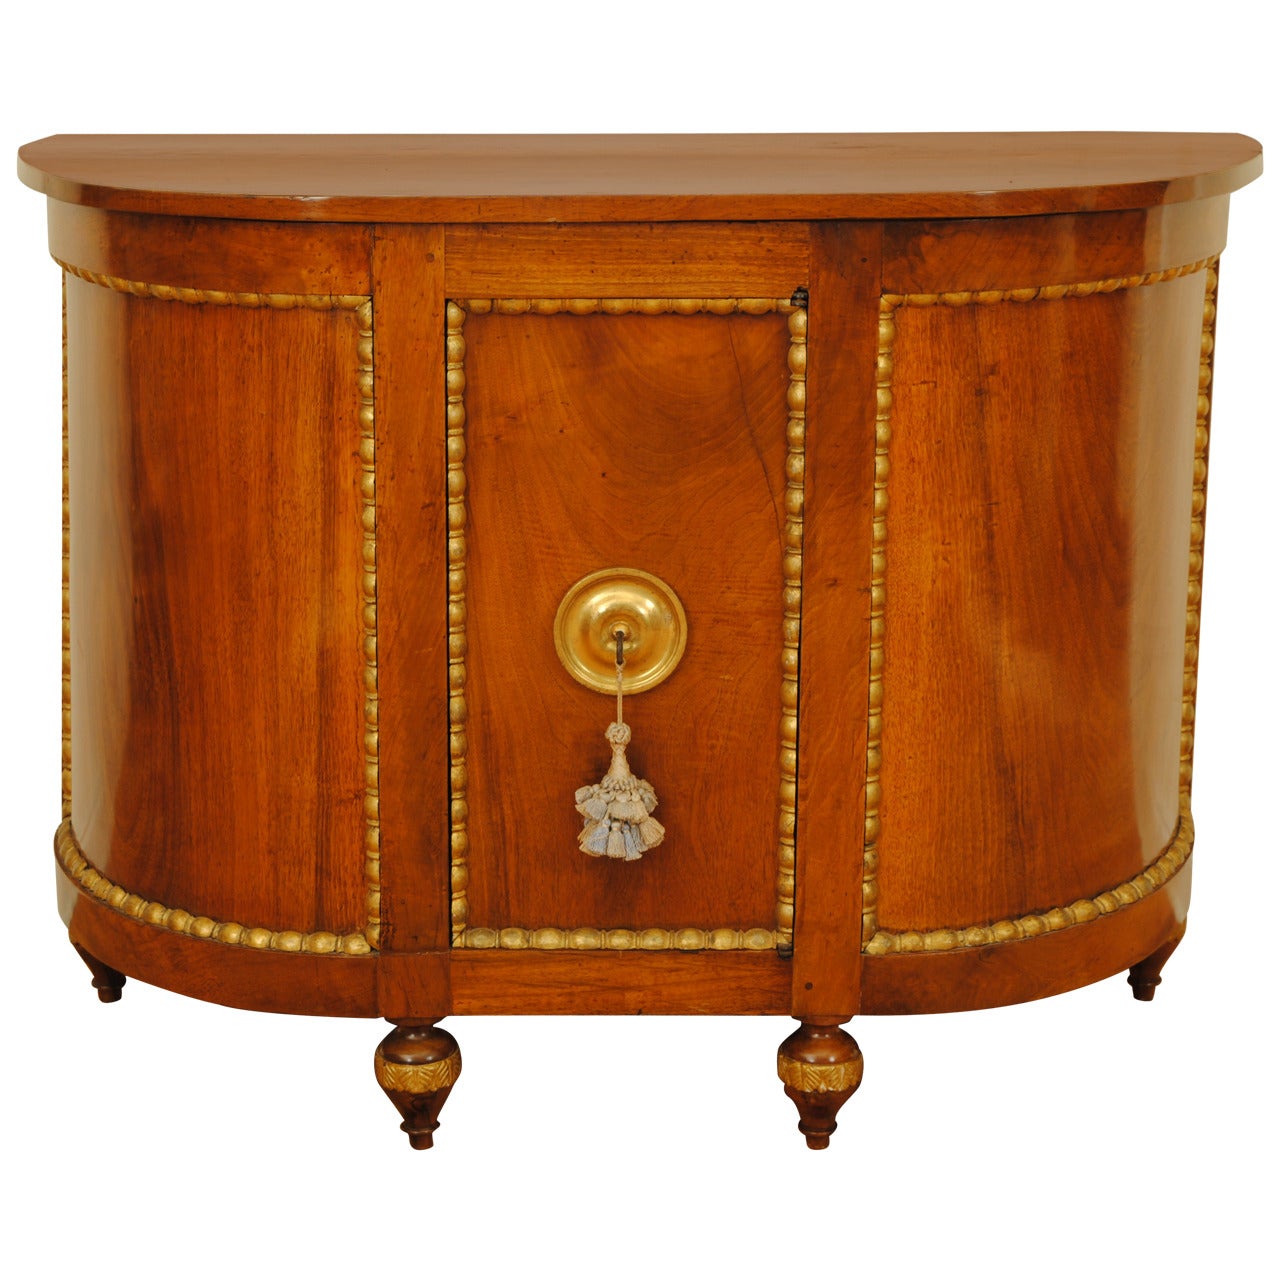 Tuscan Neoclassic Fruitwood and Giltwood One-Door Credenza, Early 19th Century